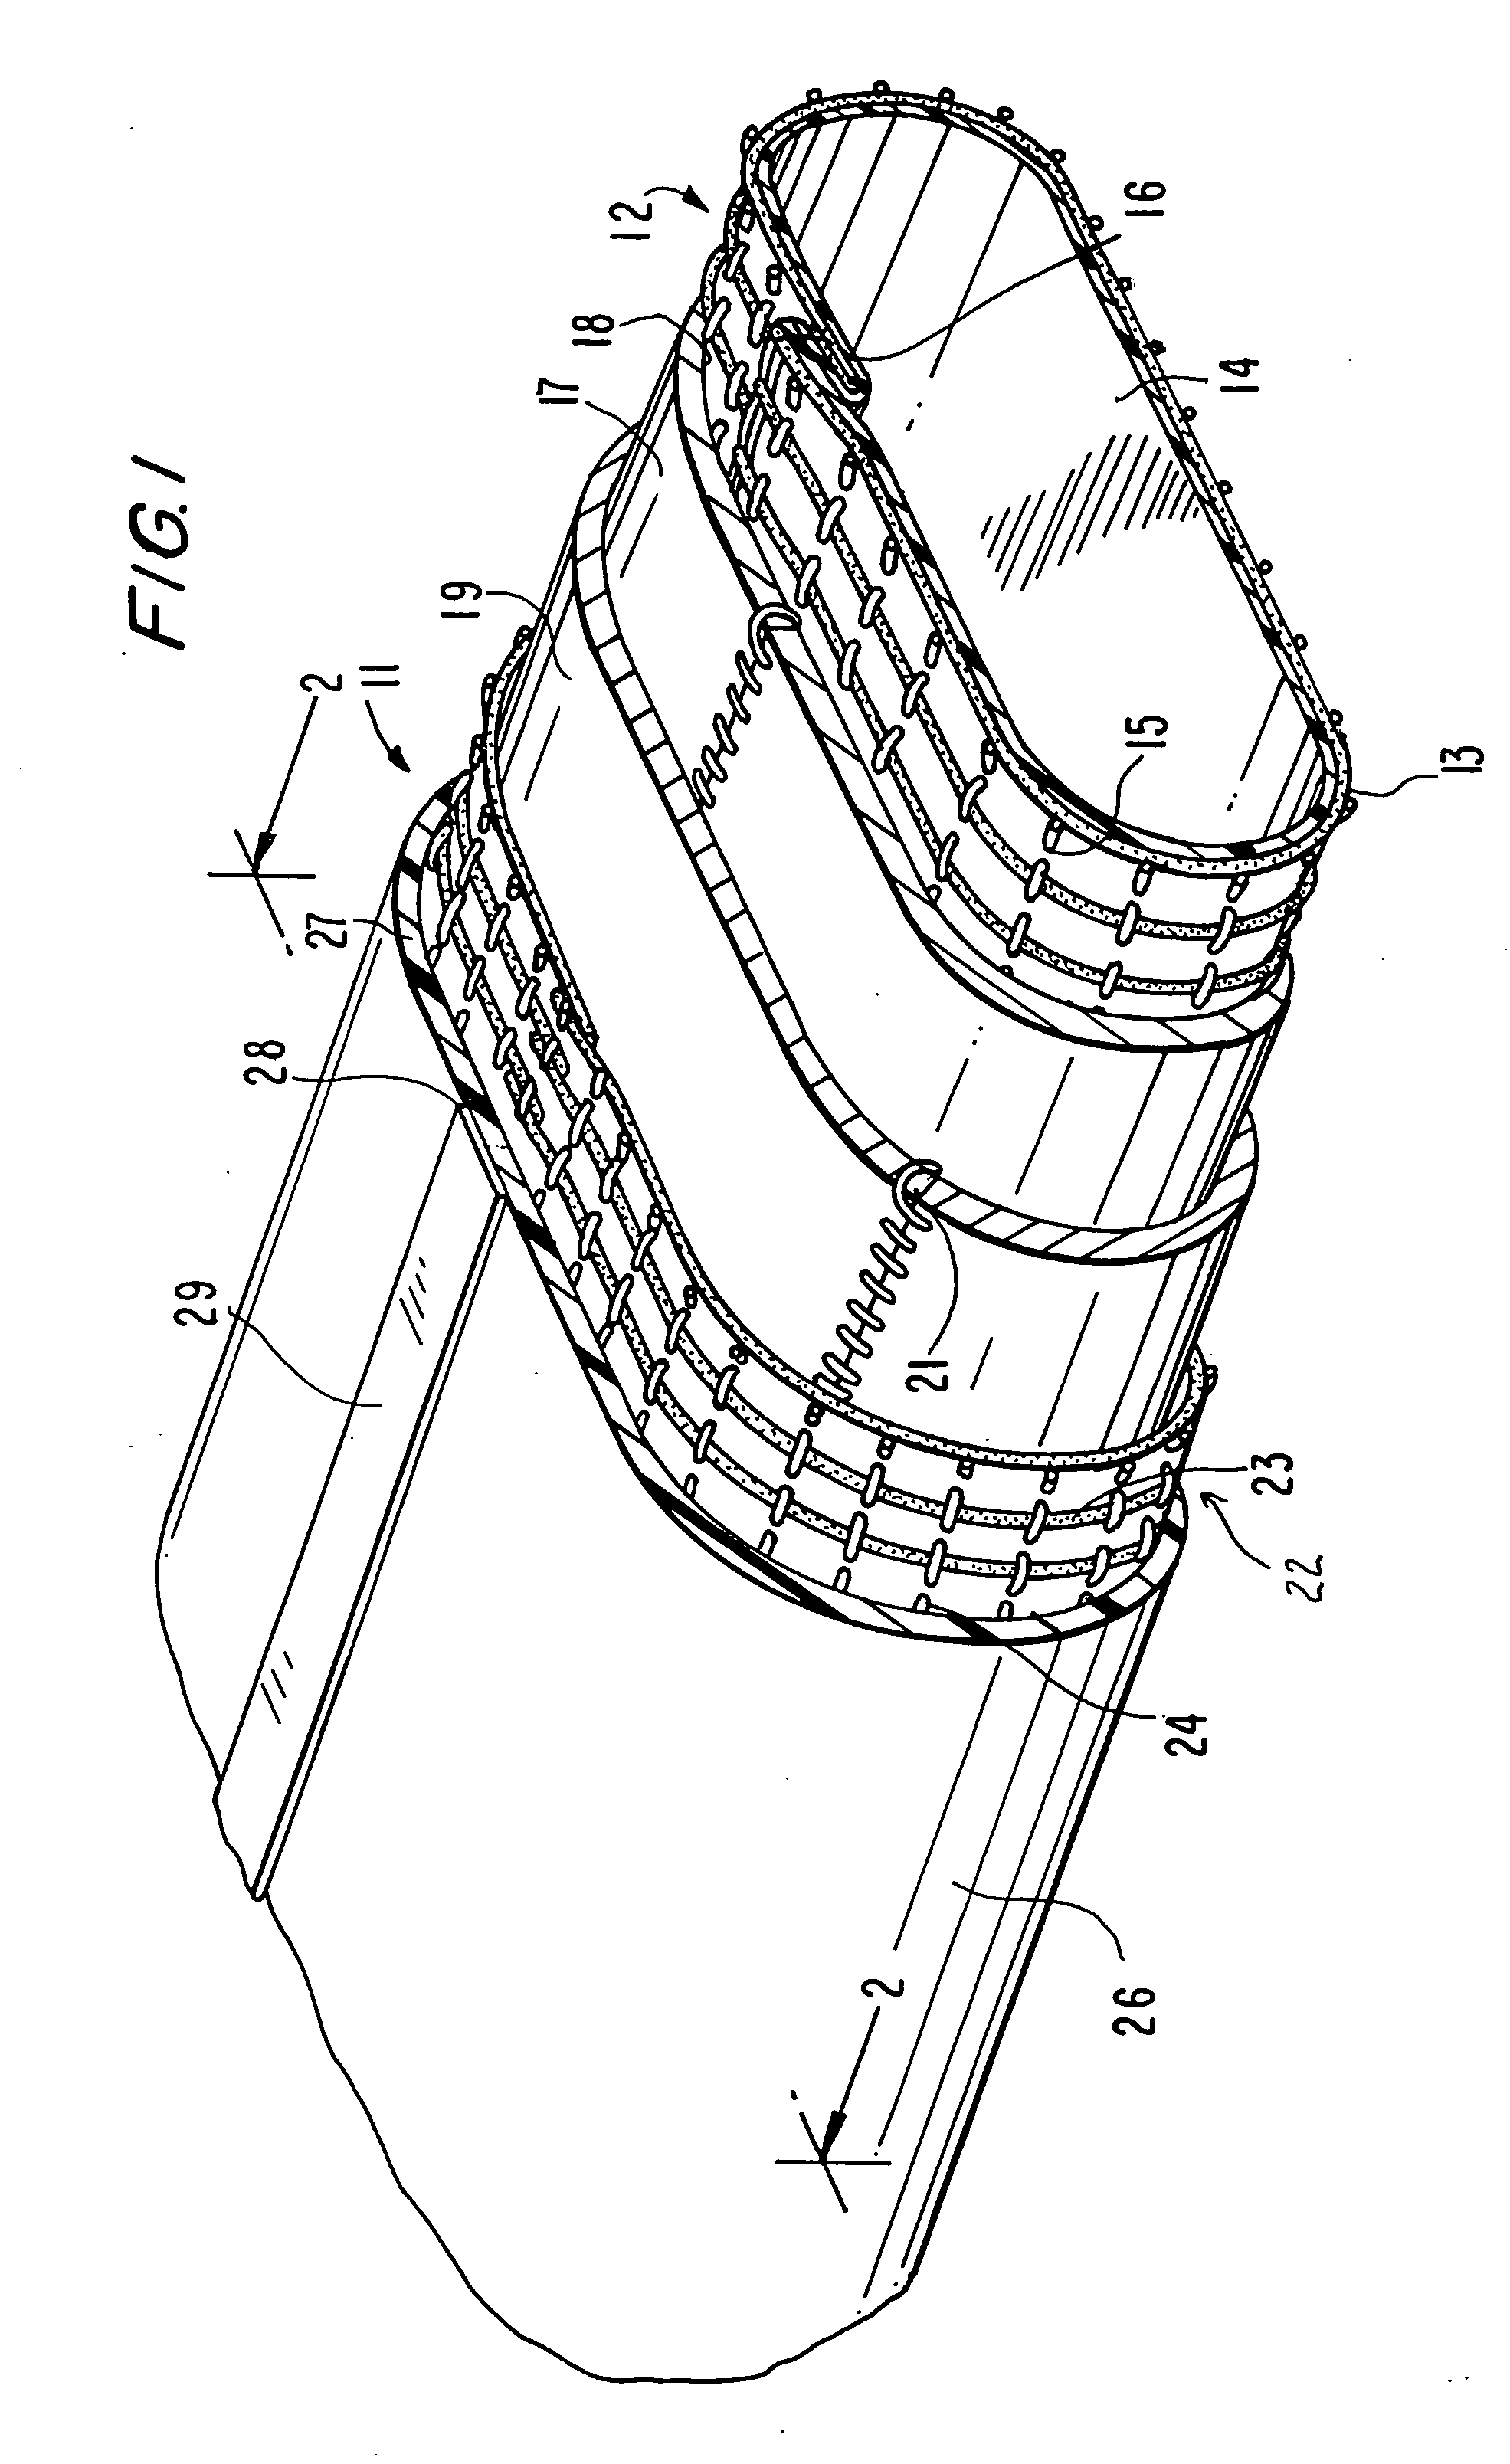 Fiber reinforced composite liner for lining an existing conduit and method of manufacture